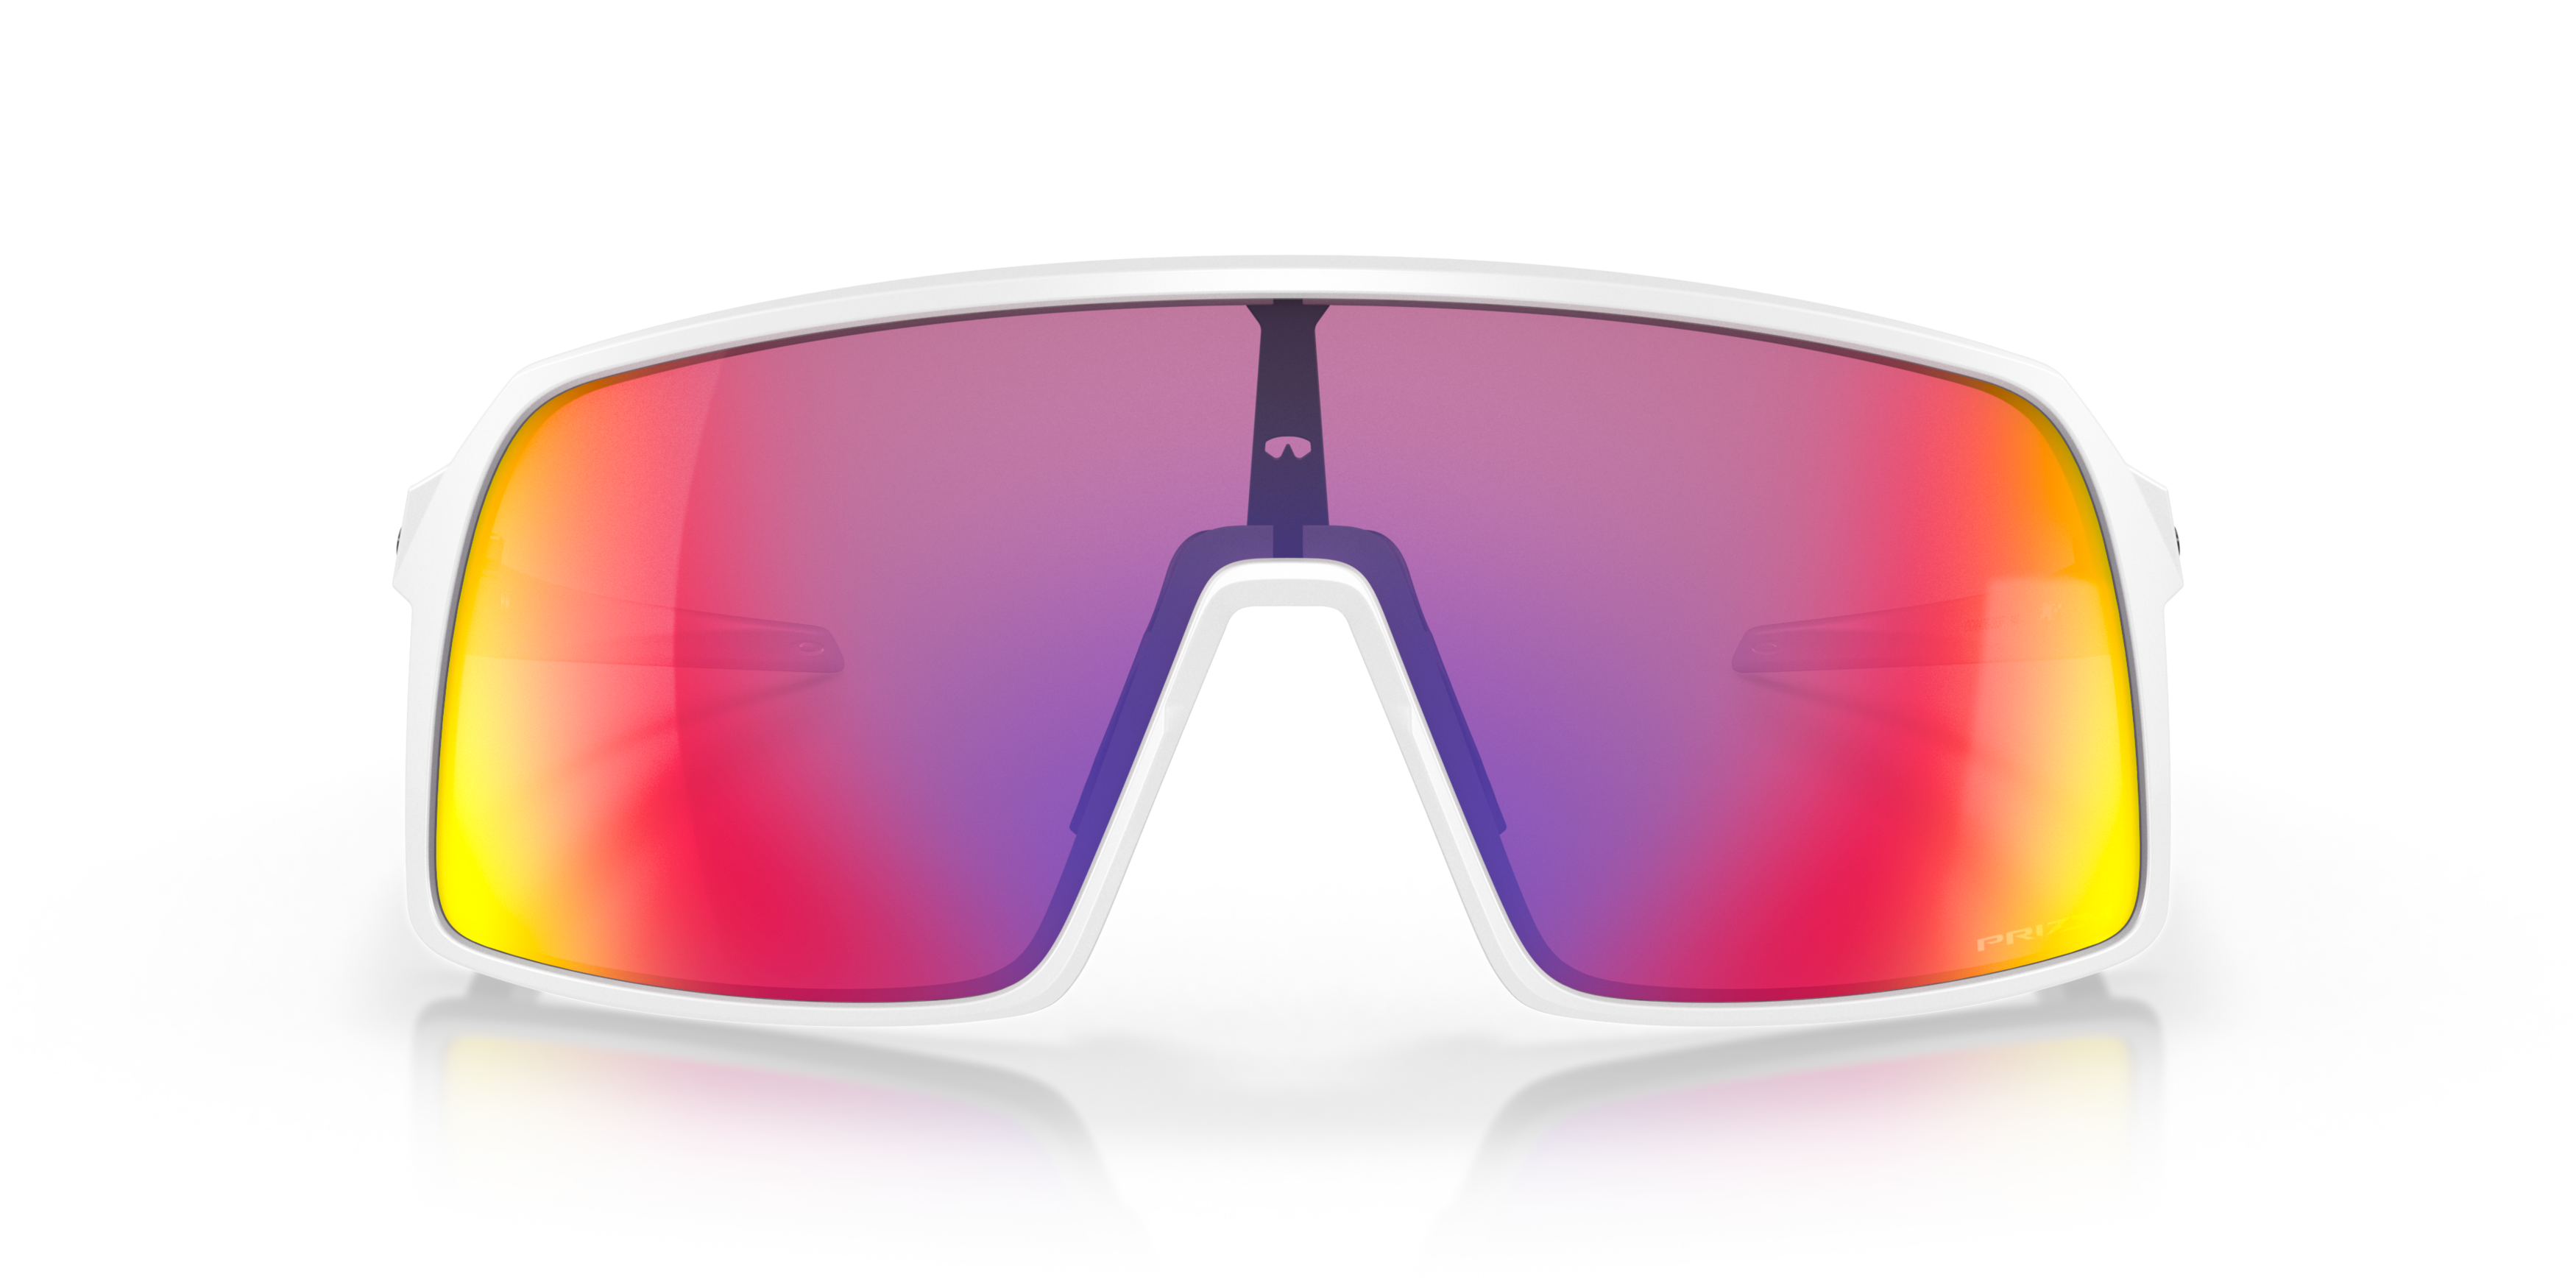 [products.image.front] Oakley SUTRO OO9406 940606